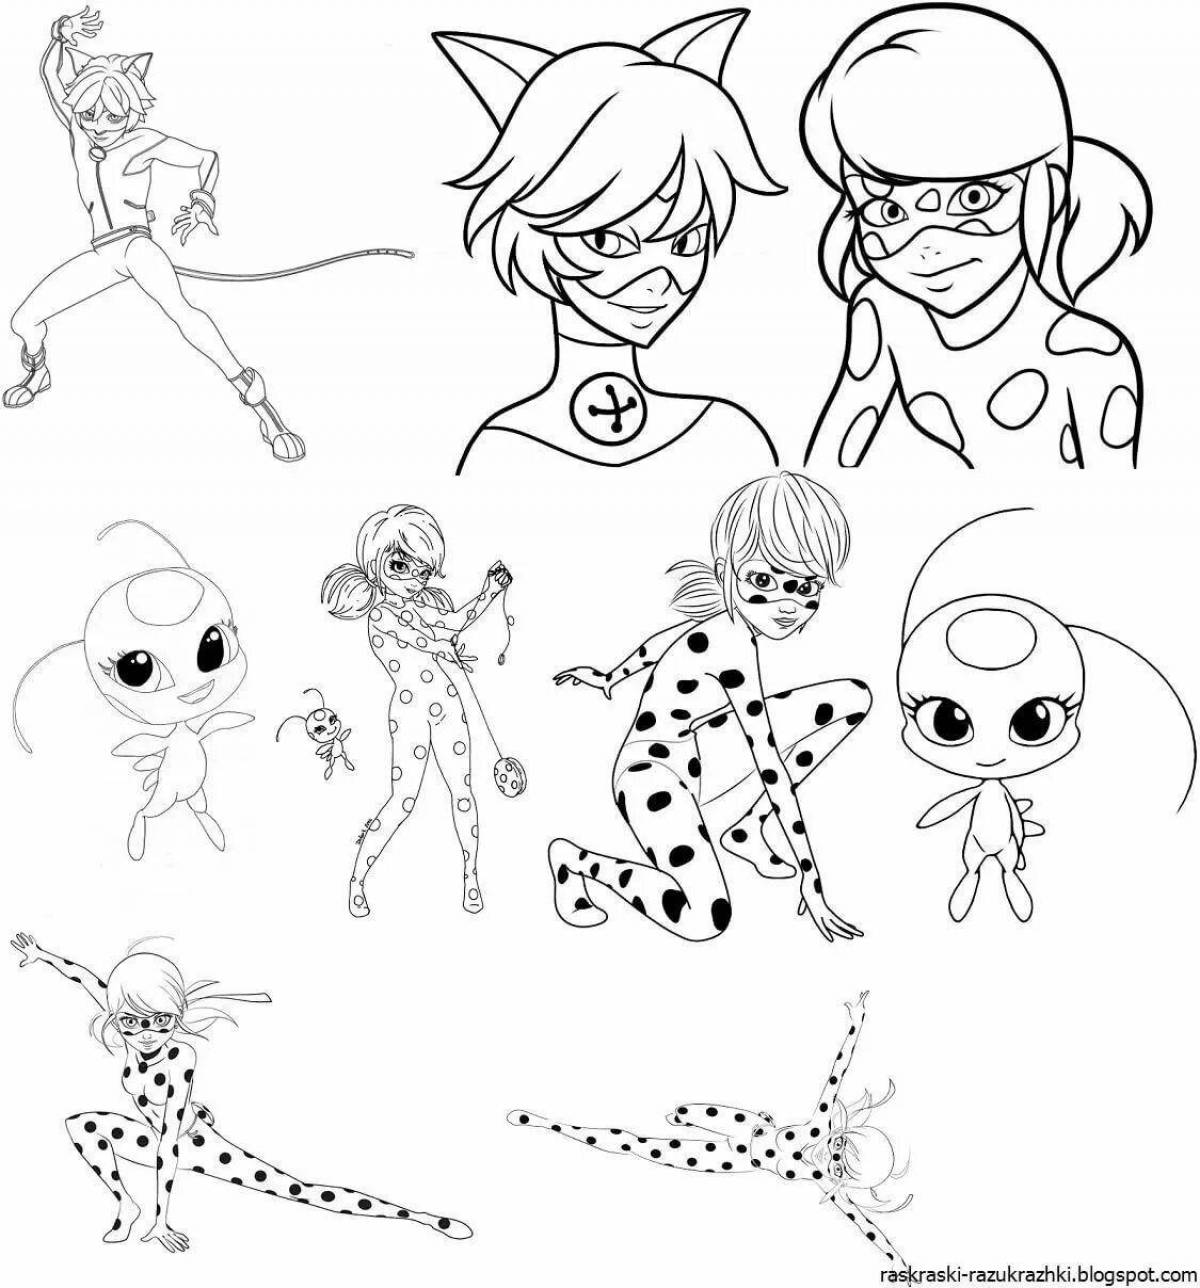 Lady bug and super cat all characters and their kwami ​​#2